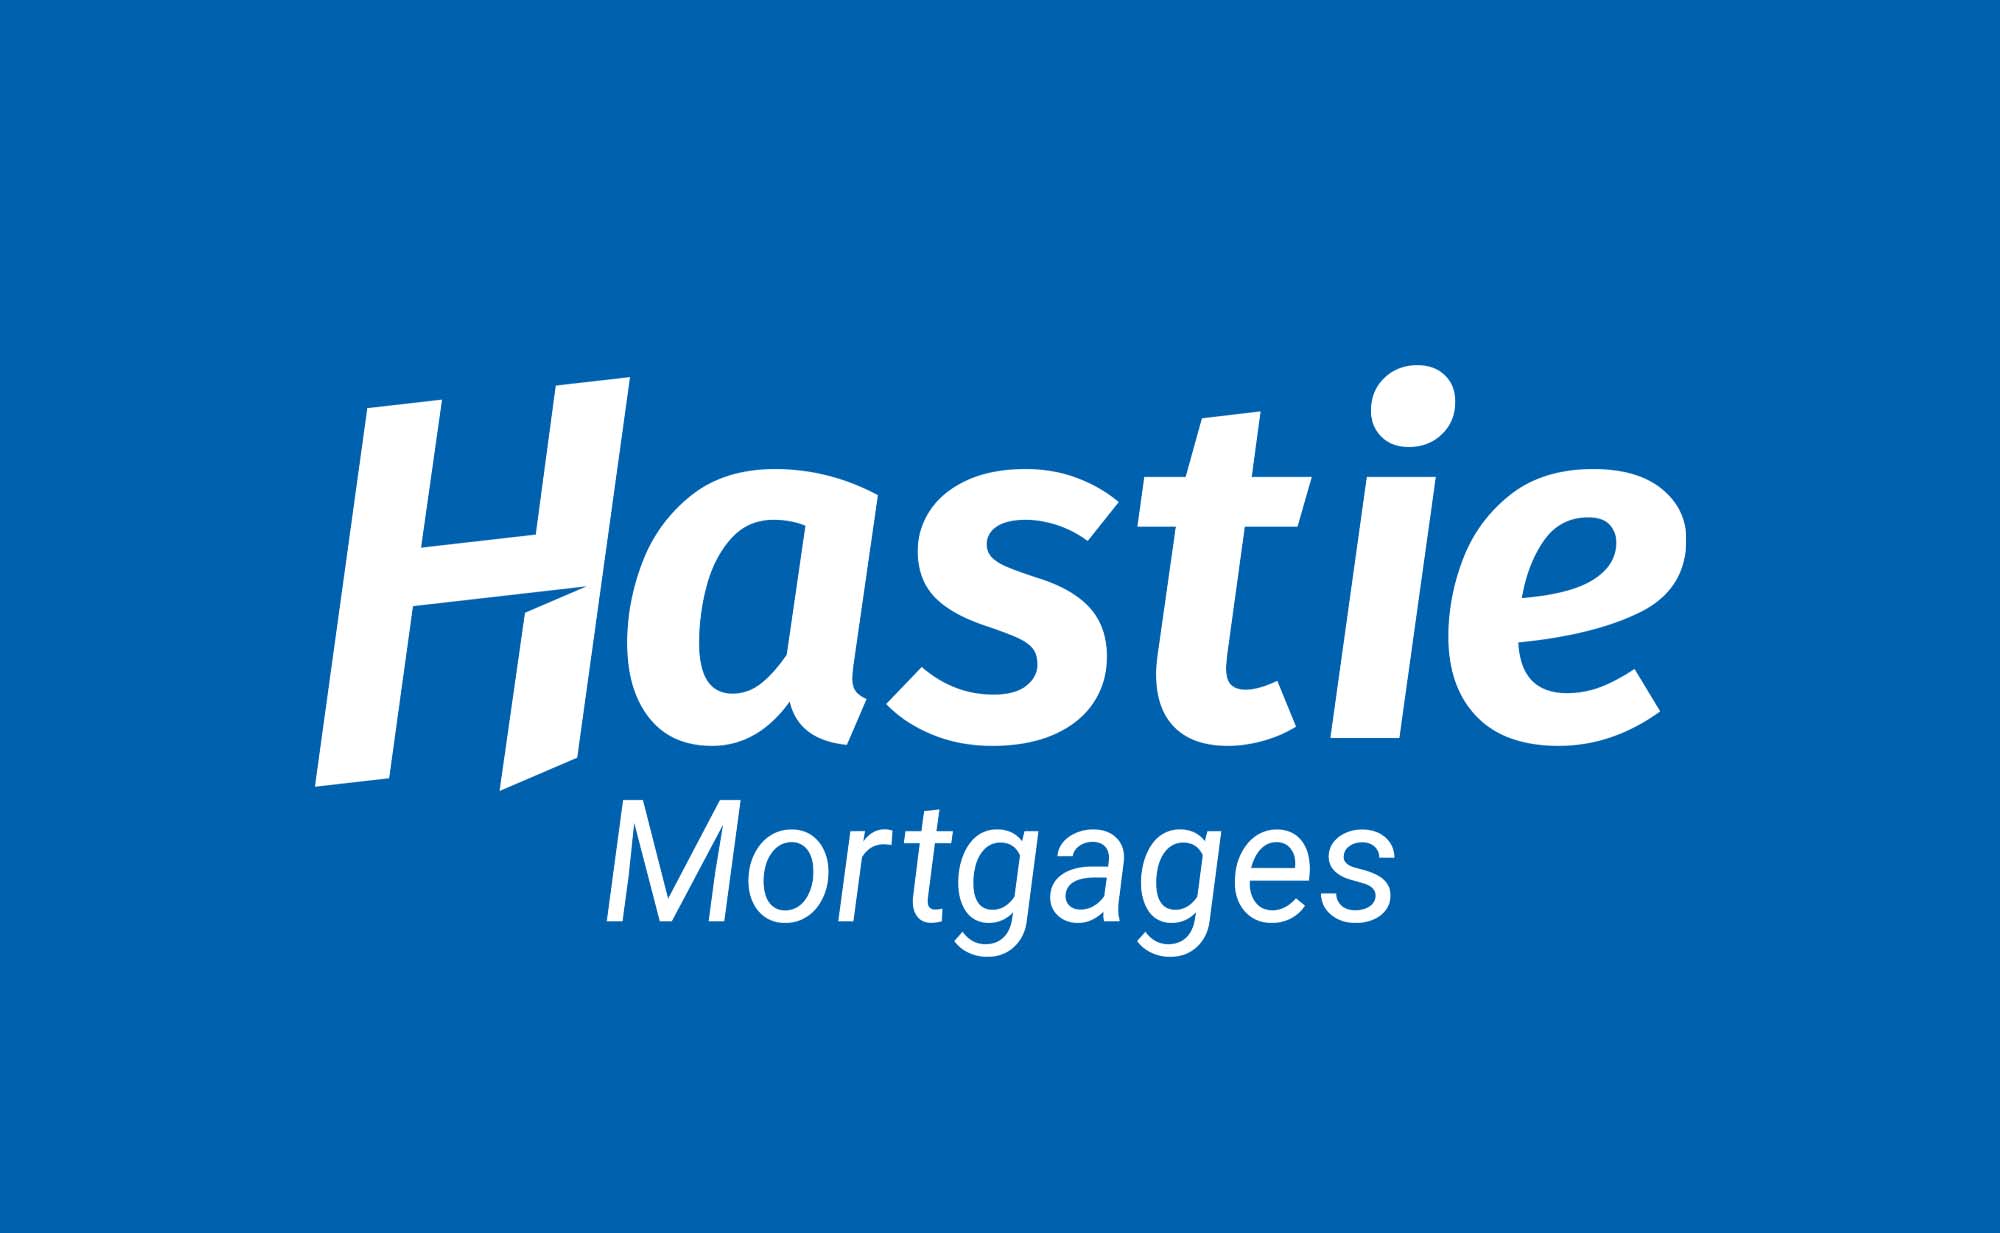 Hastie Mortgages New Brand Identity – Case Study-image1 